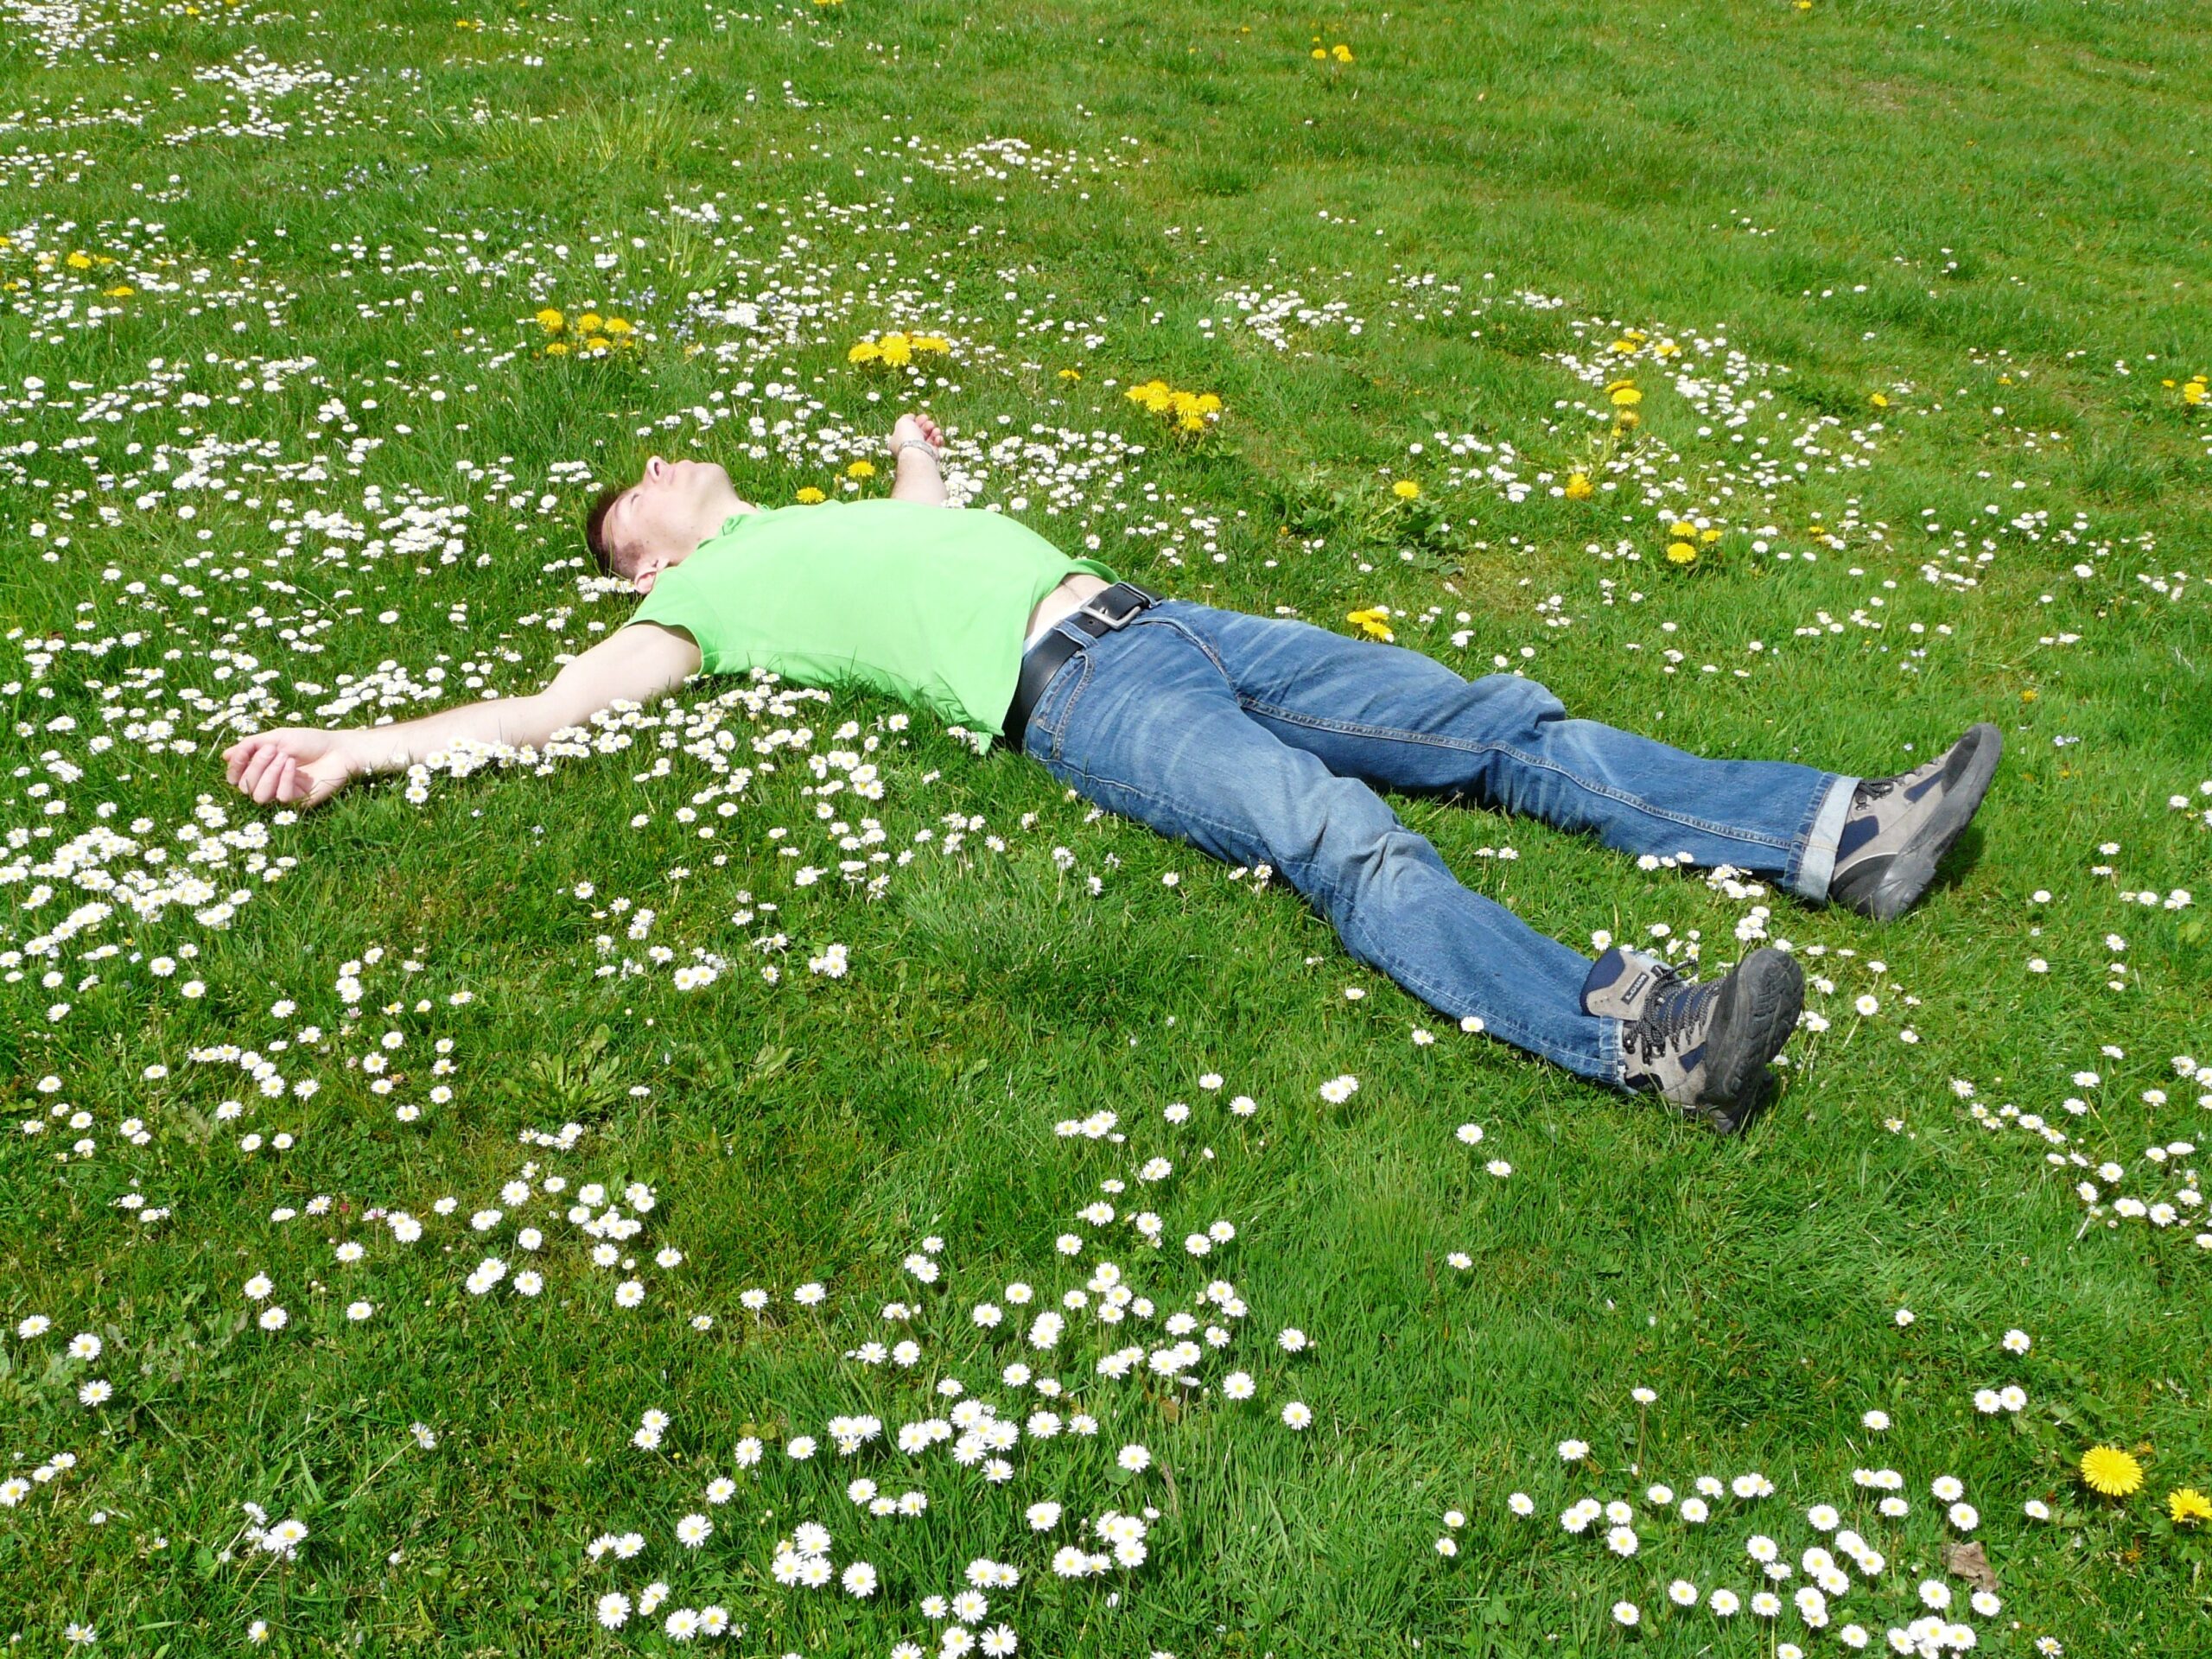 Man resting in grass and flowers